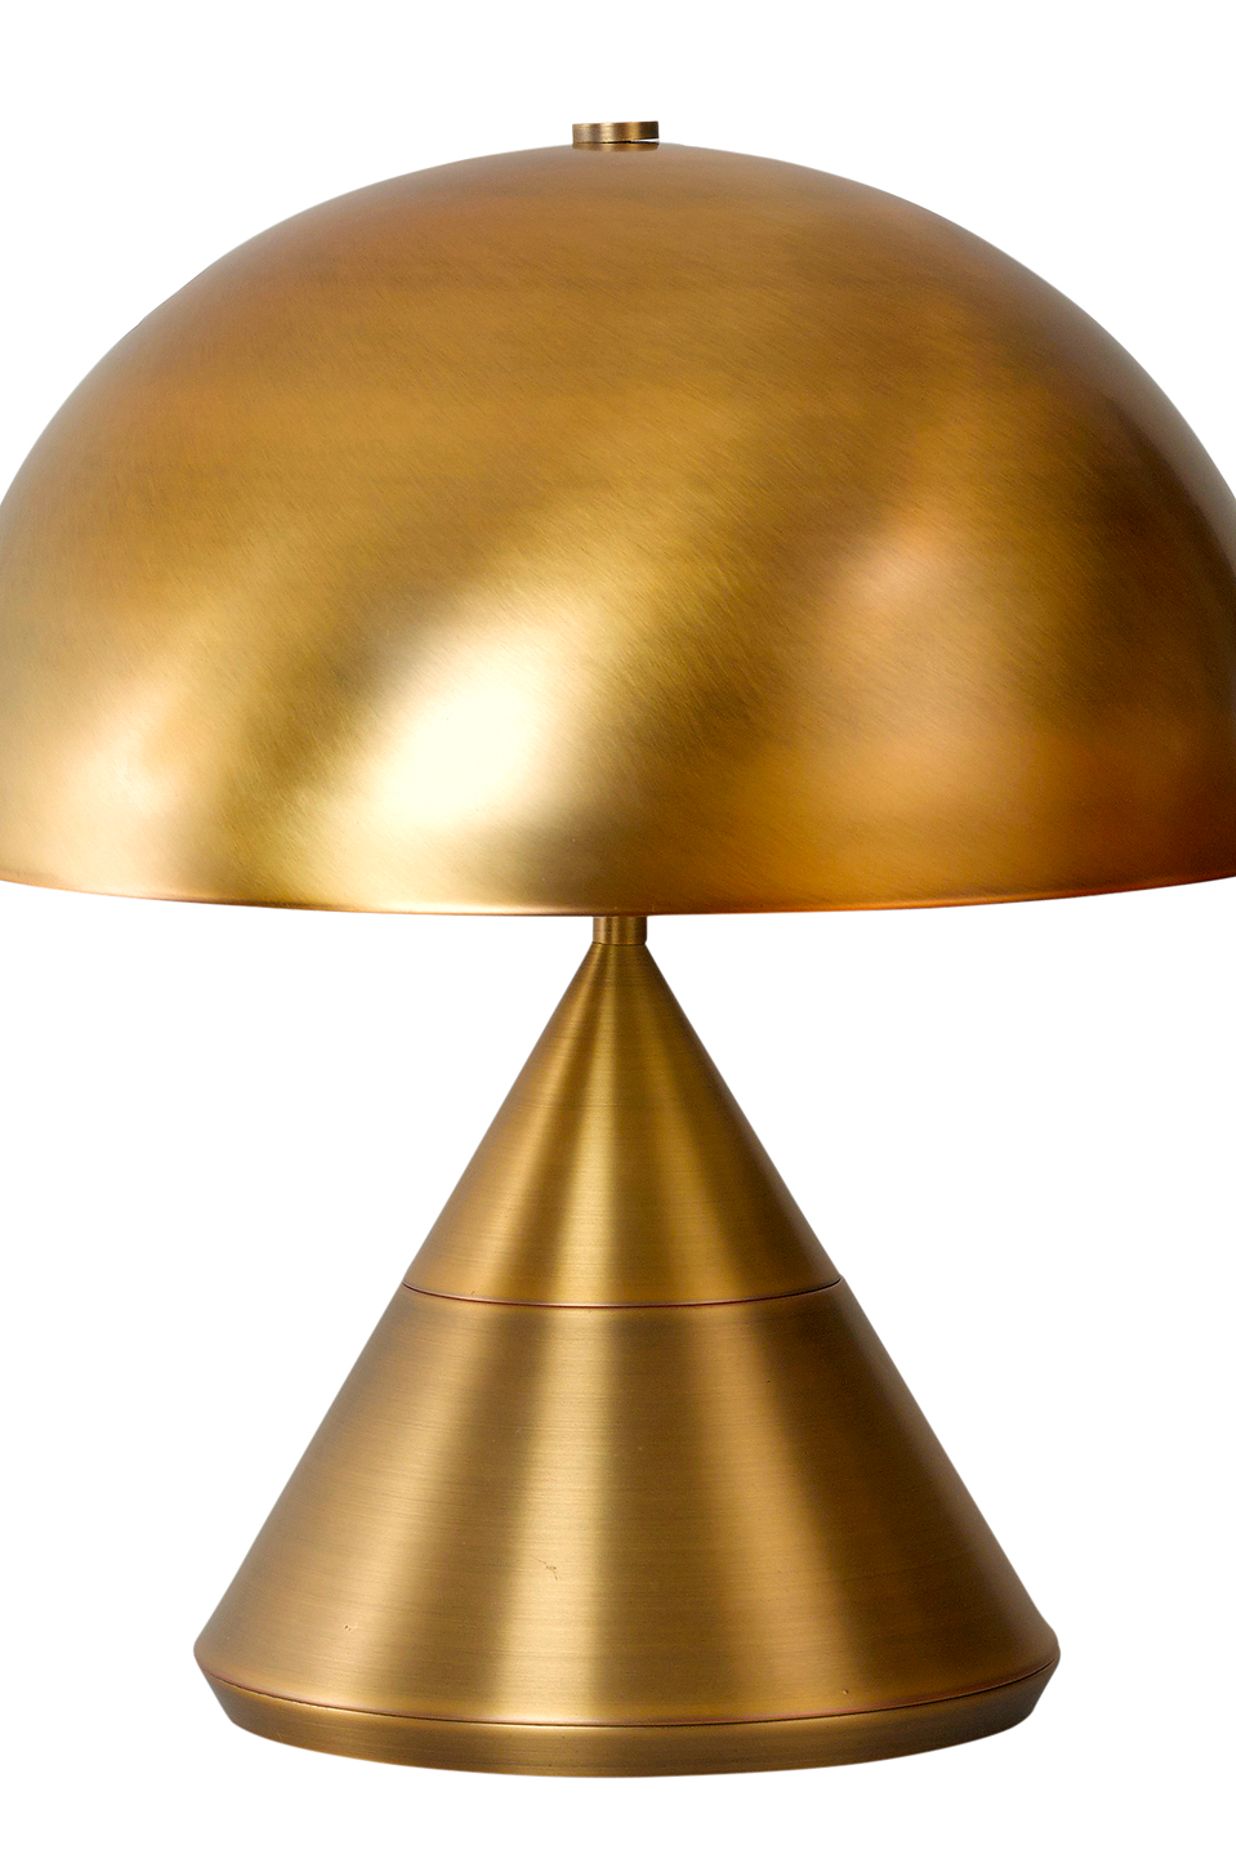 The 'Wayy' table lamp in brass, Bloomingdales